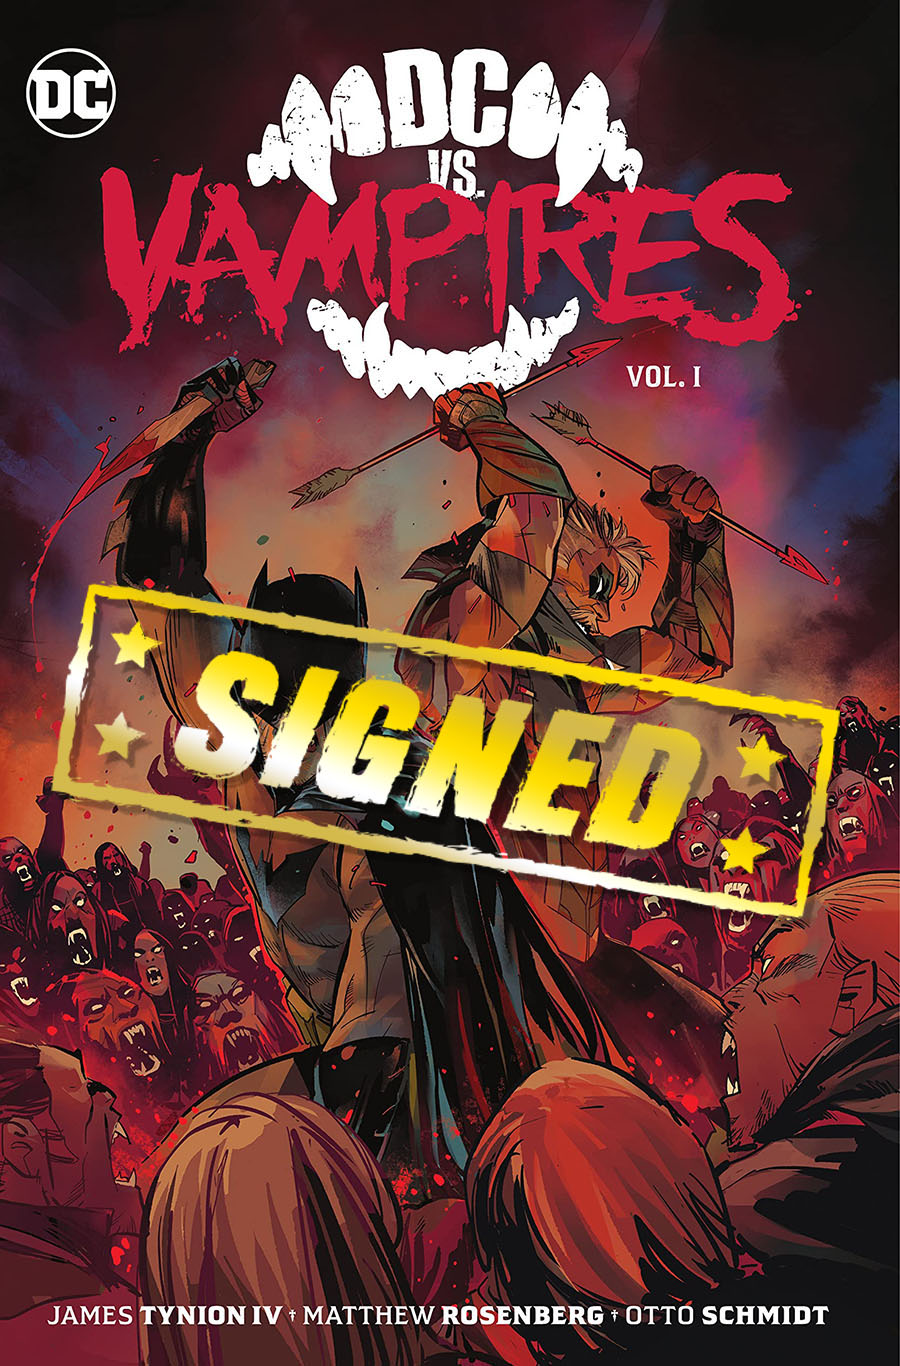 DC vs Vampires Vol 1 HC Signed By James Tynion IV